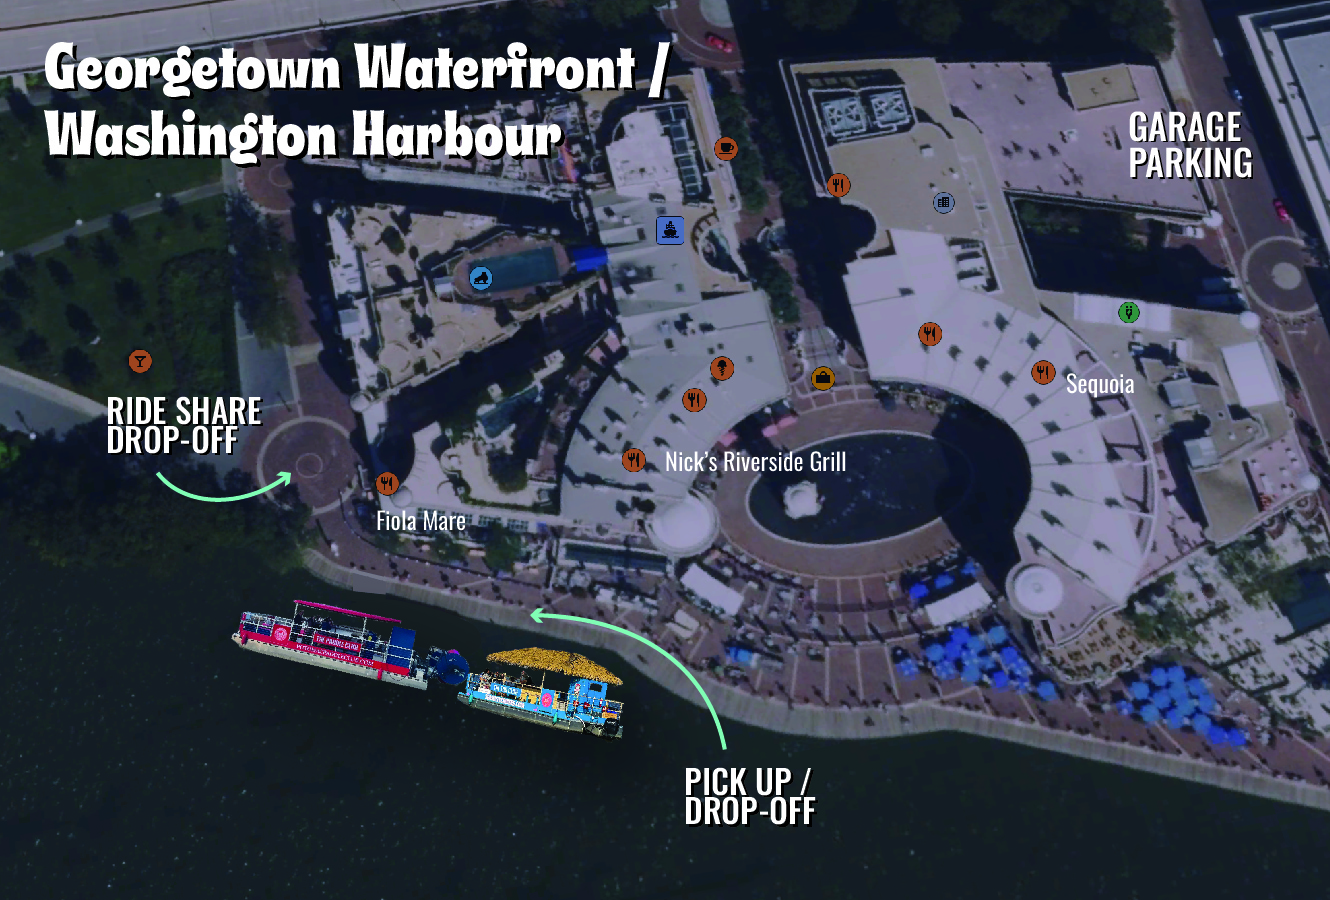 For Georgetown cruises, passengers will be picked up and dropped off on the docks at Washington Harbour right outside of Nick’s Riverside Grill.